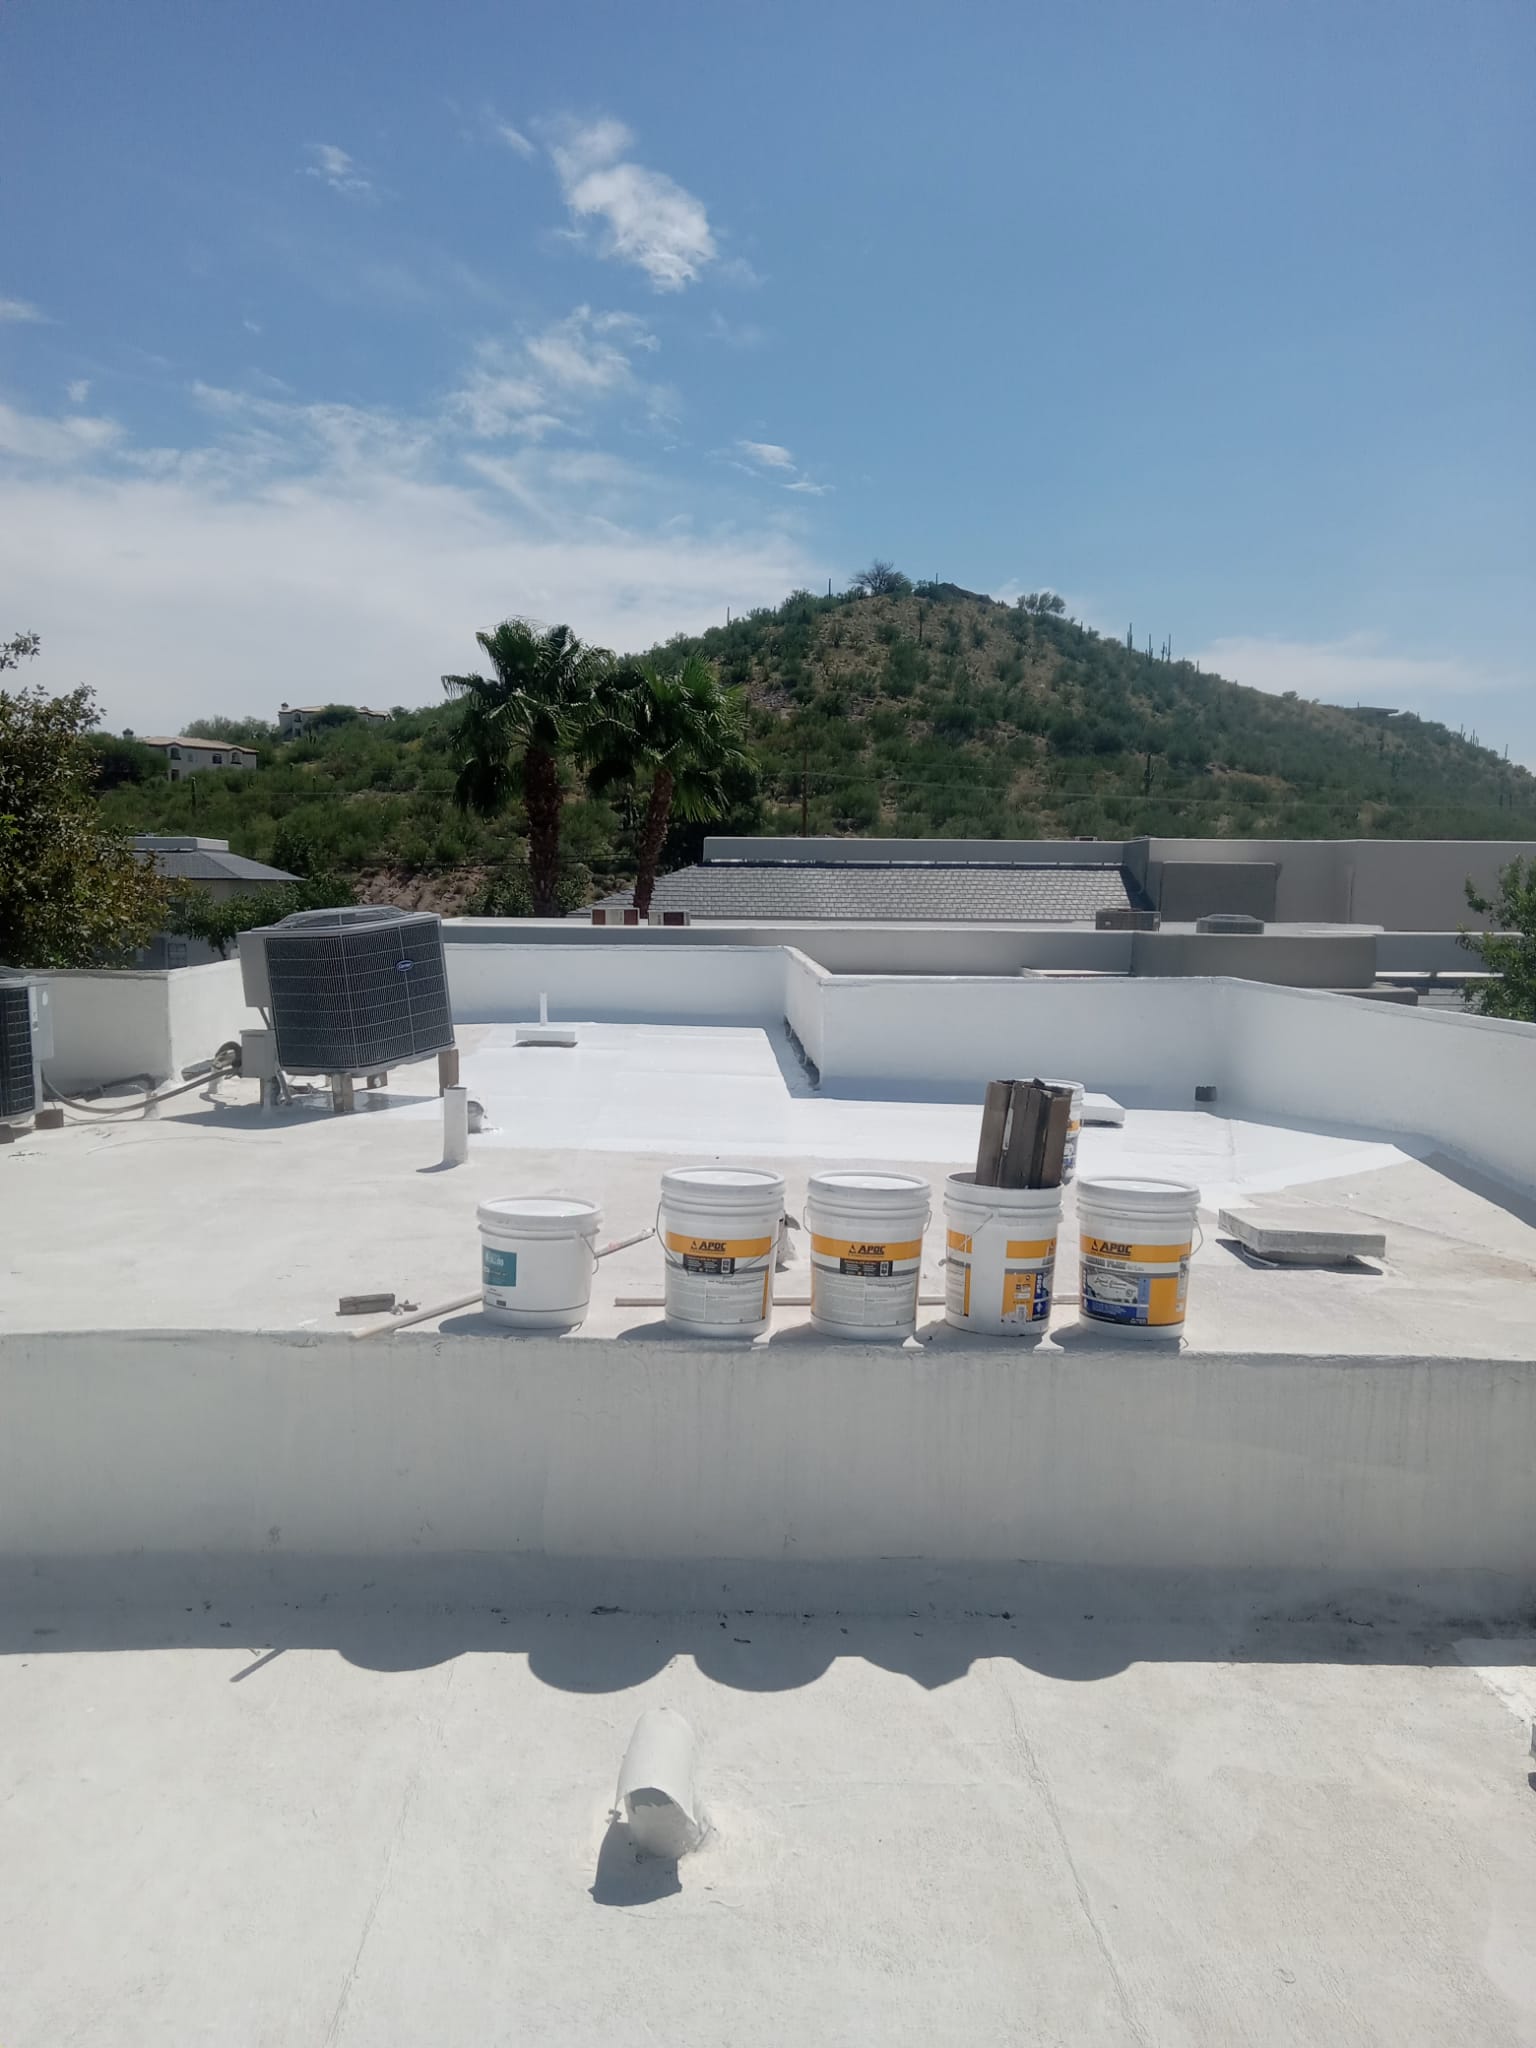 A Biltmore Area roof with white buckets and a mountain in the background.